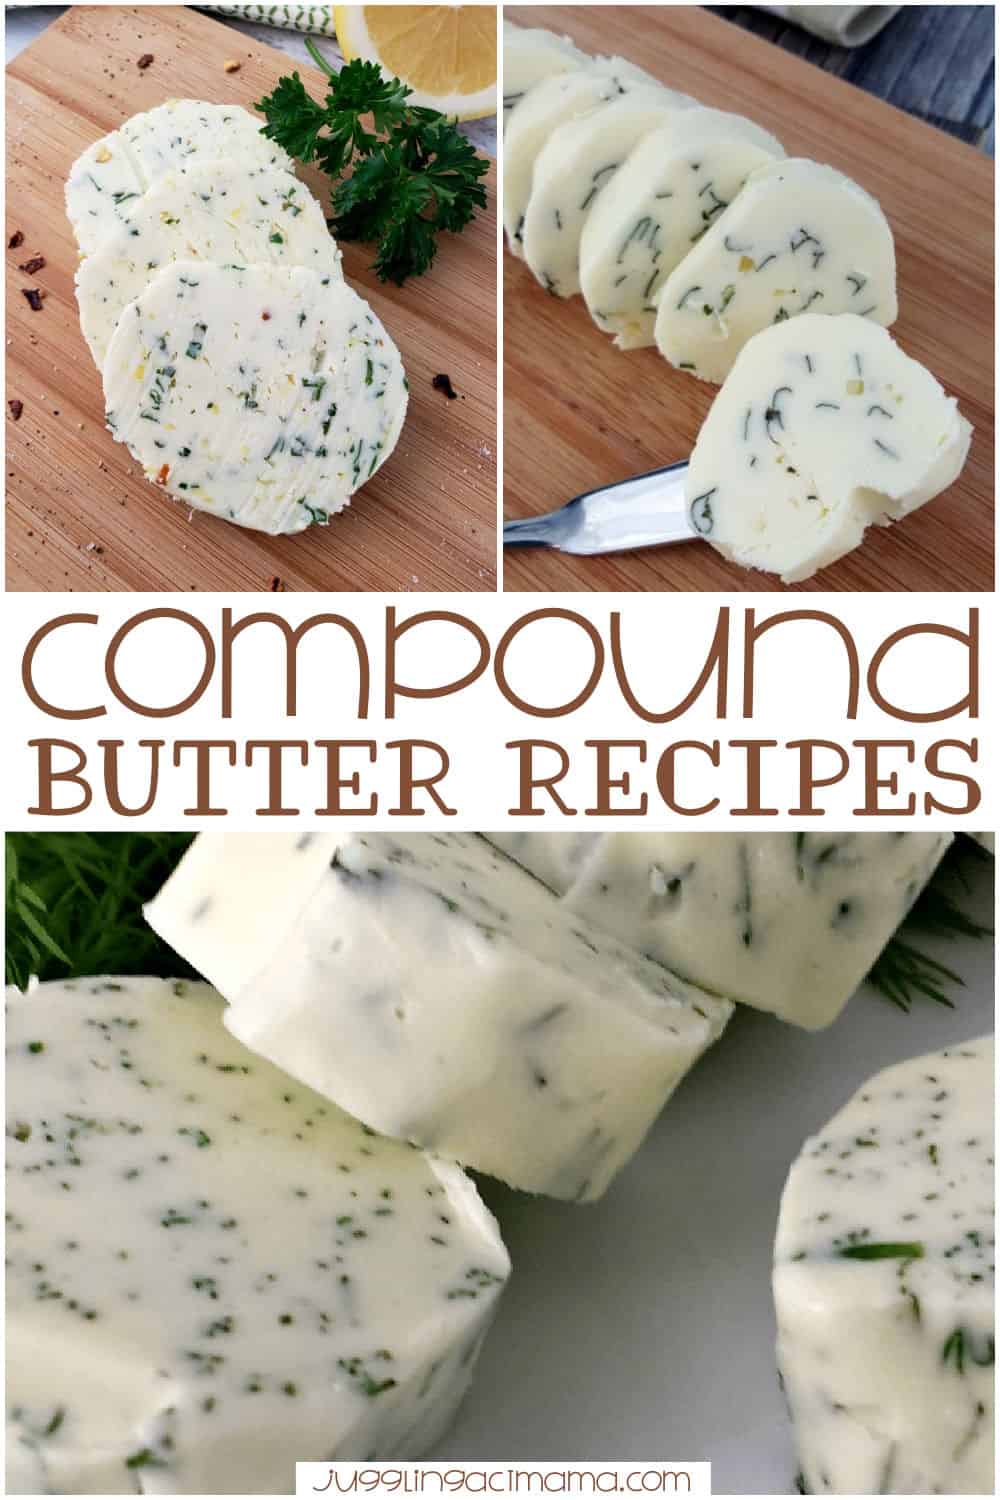 Compound butters are an easy way to add flavor to a variety of recipes. Here, you'll find many delicious compound butter recipes to choose from that come together in no time! via @jugglingactmama